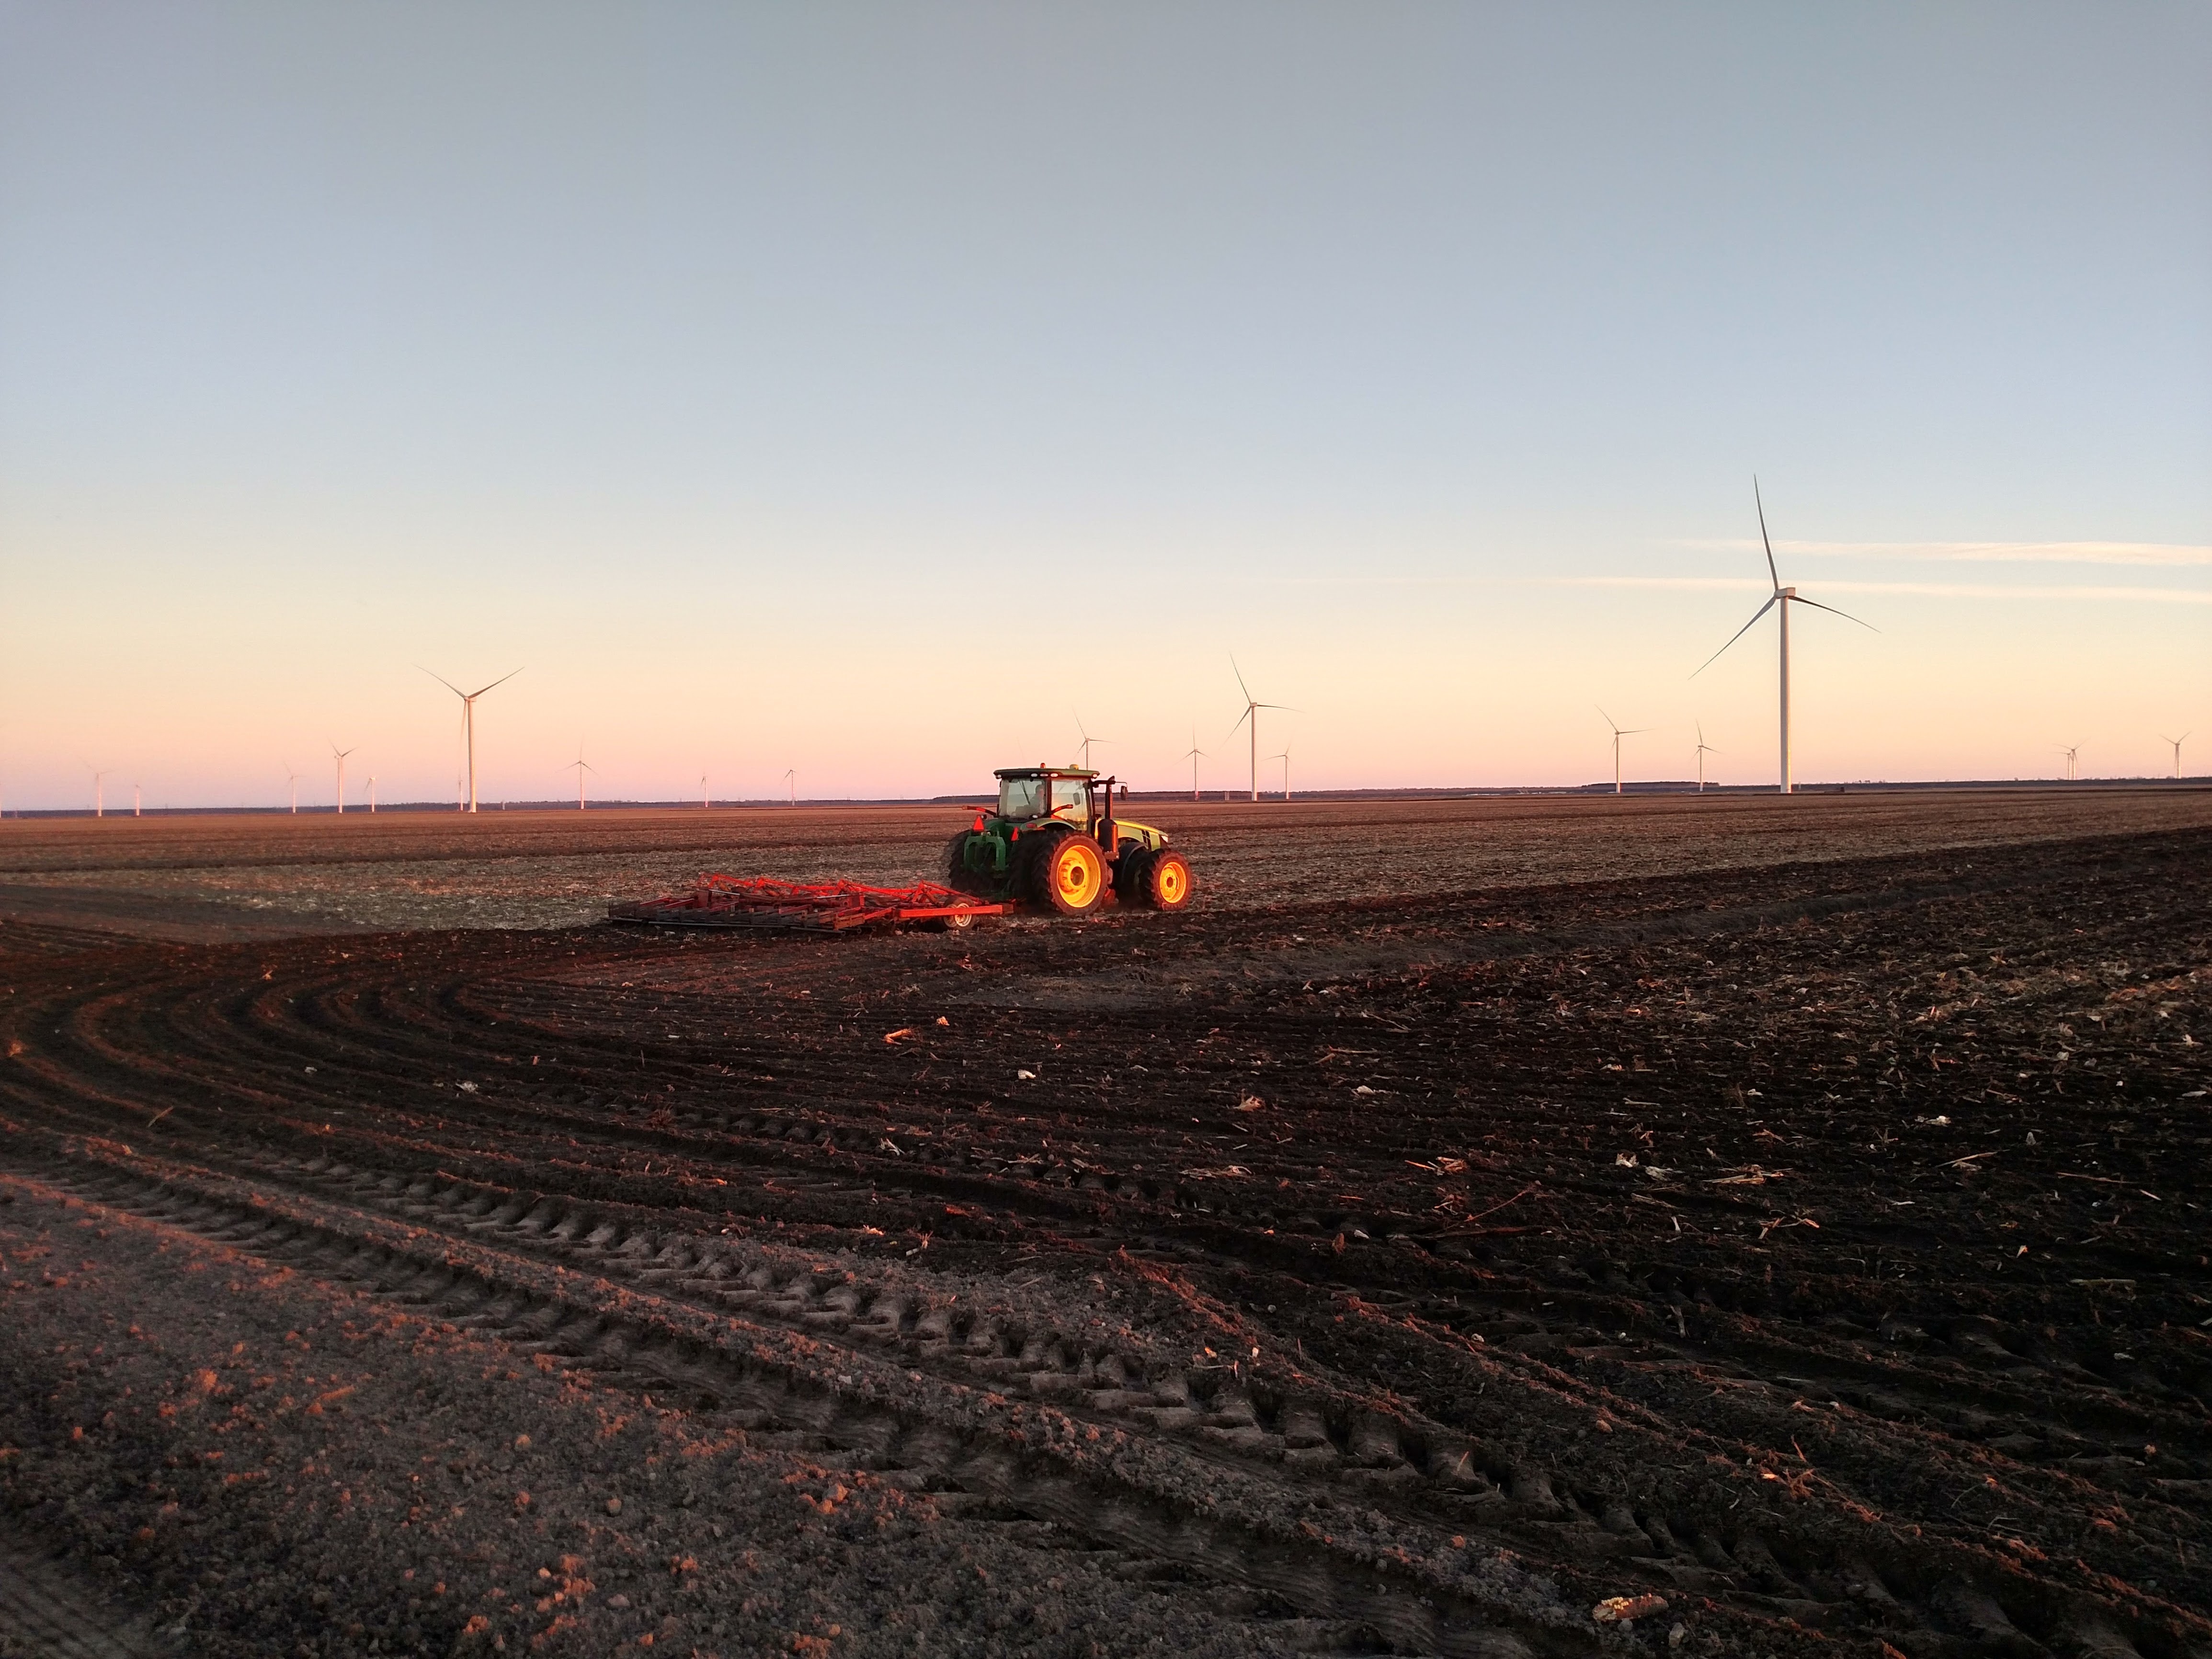 A group of wind turbines behind a plowed field with a tractor in it